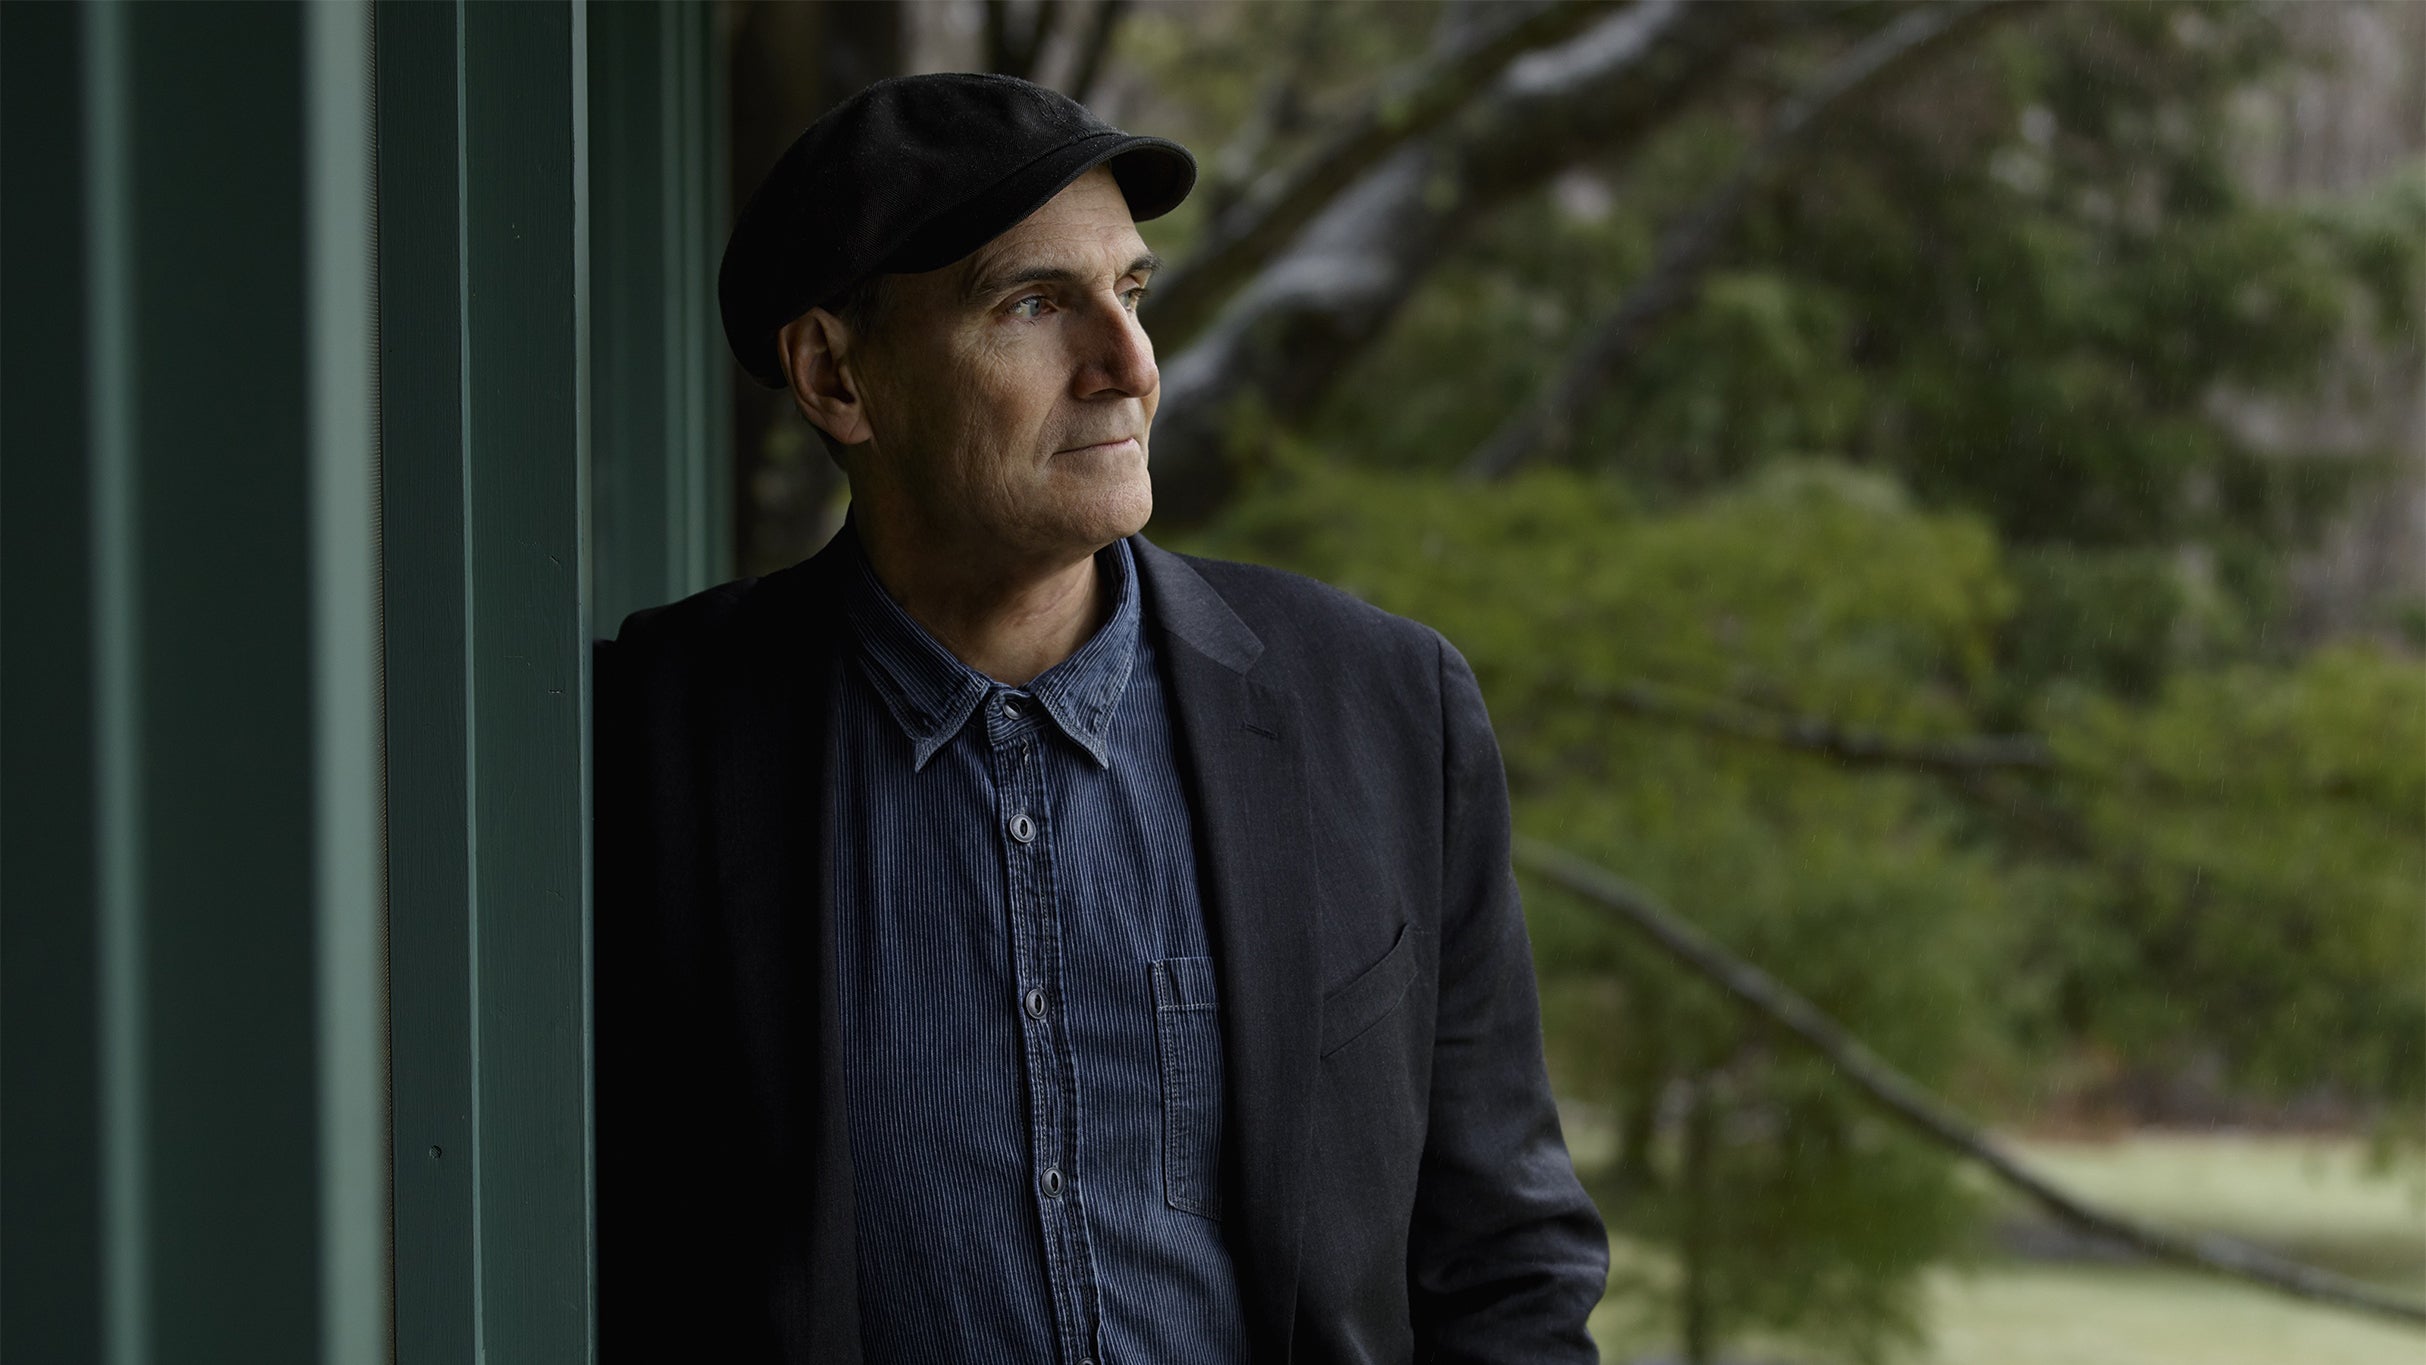 presale code for James Taylor face value tickets in Wantagh